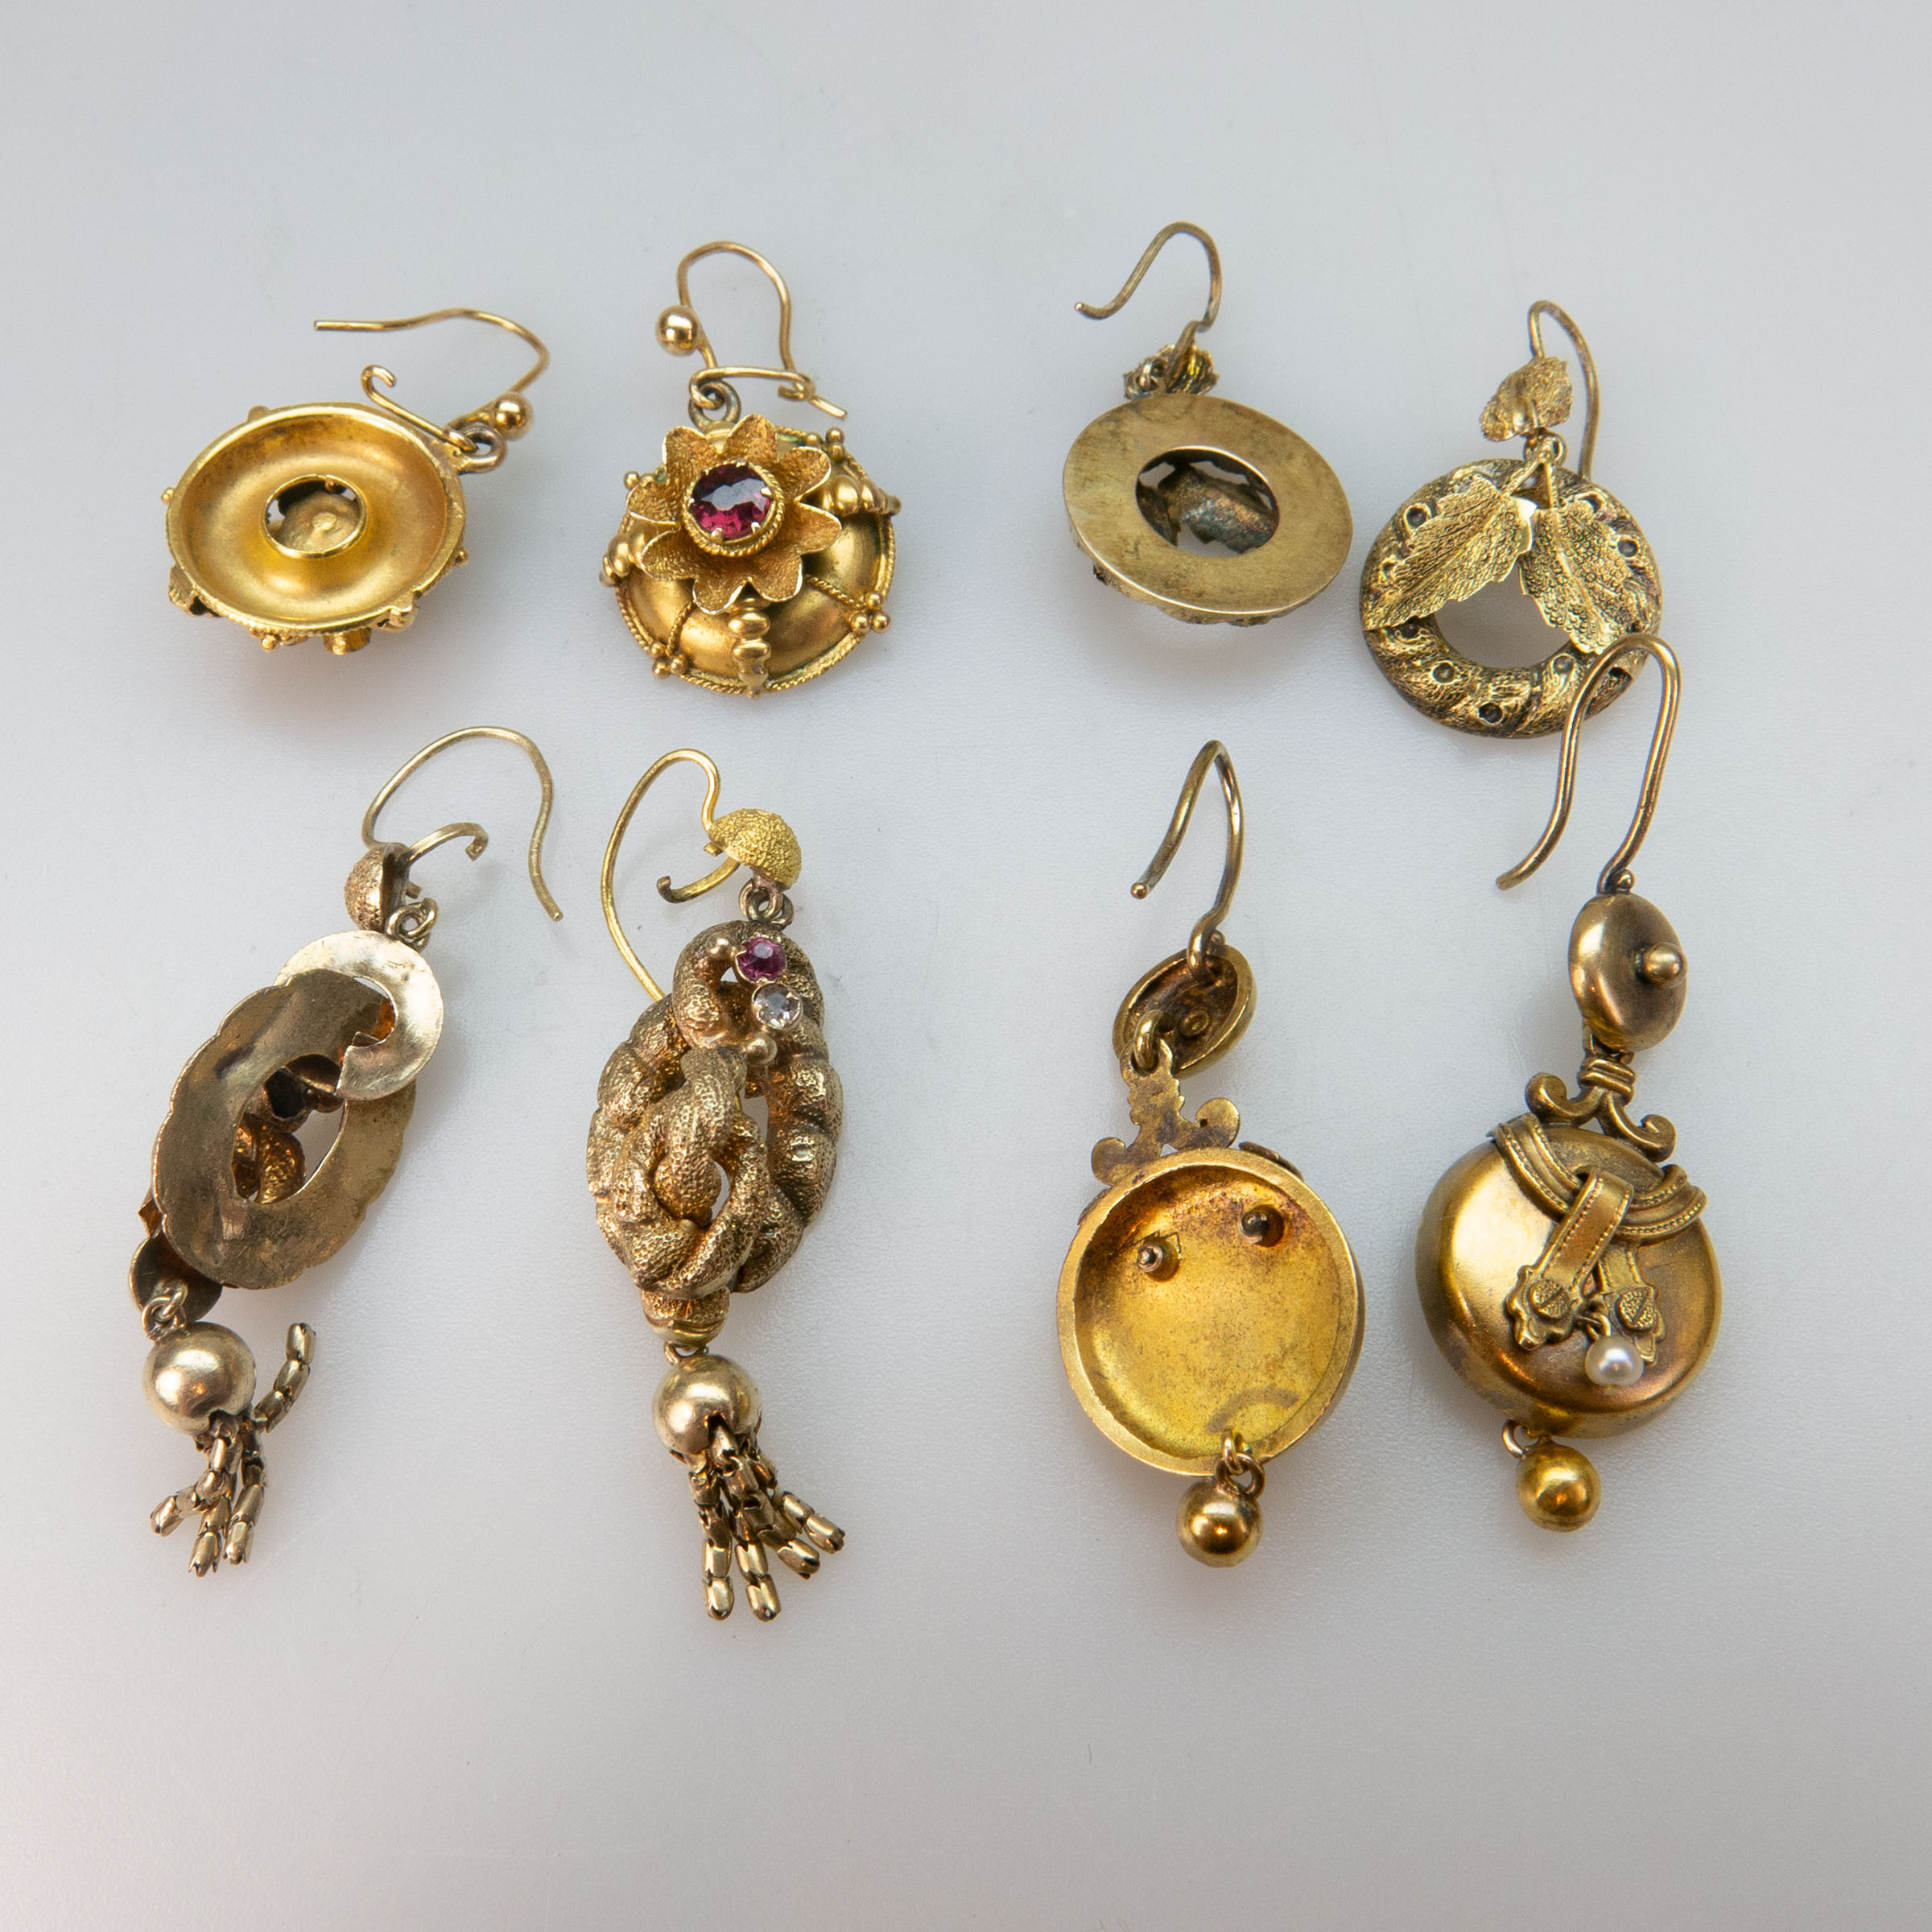 4 Pairs Of 19th Century Gold Hook-Back Earrings